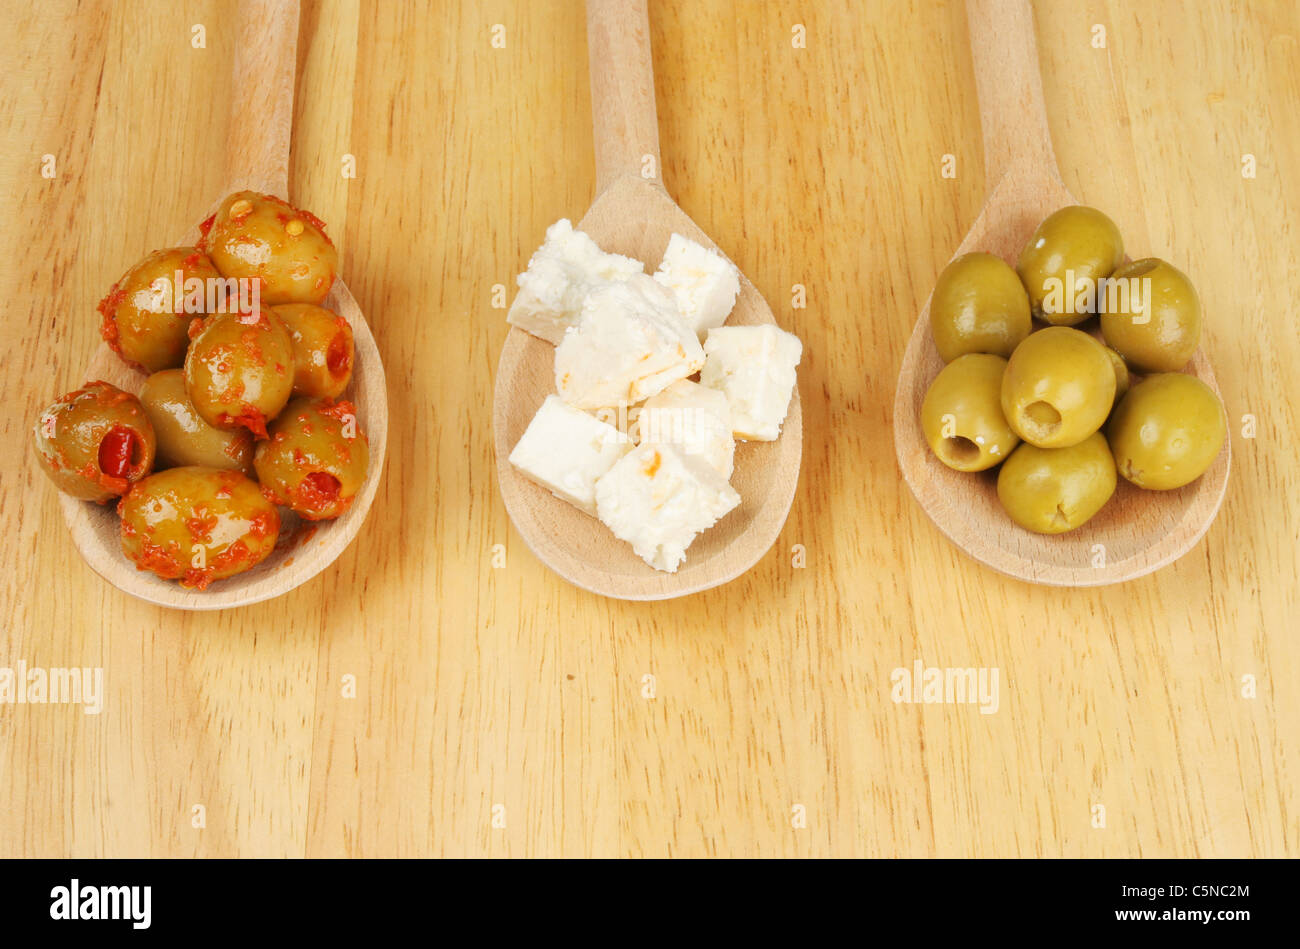 Olives and feta cheese in wooden spoons on a wooden board Stock Photo